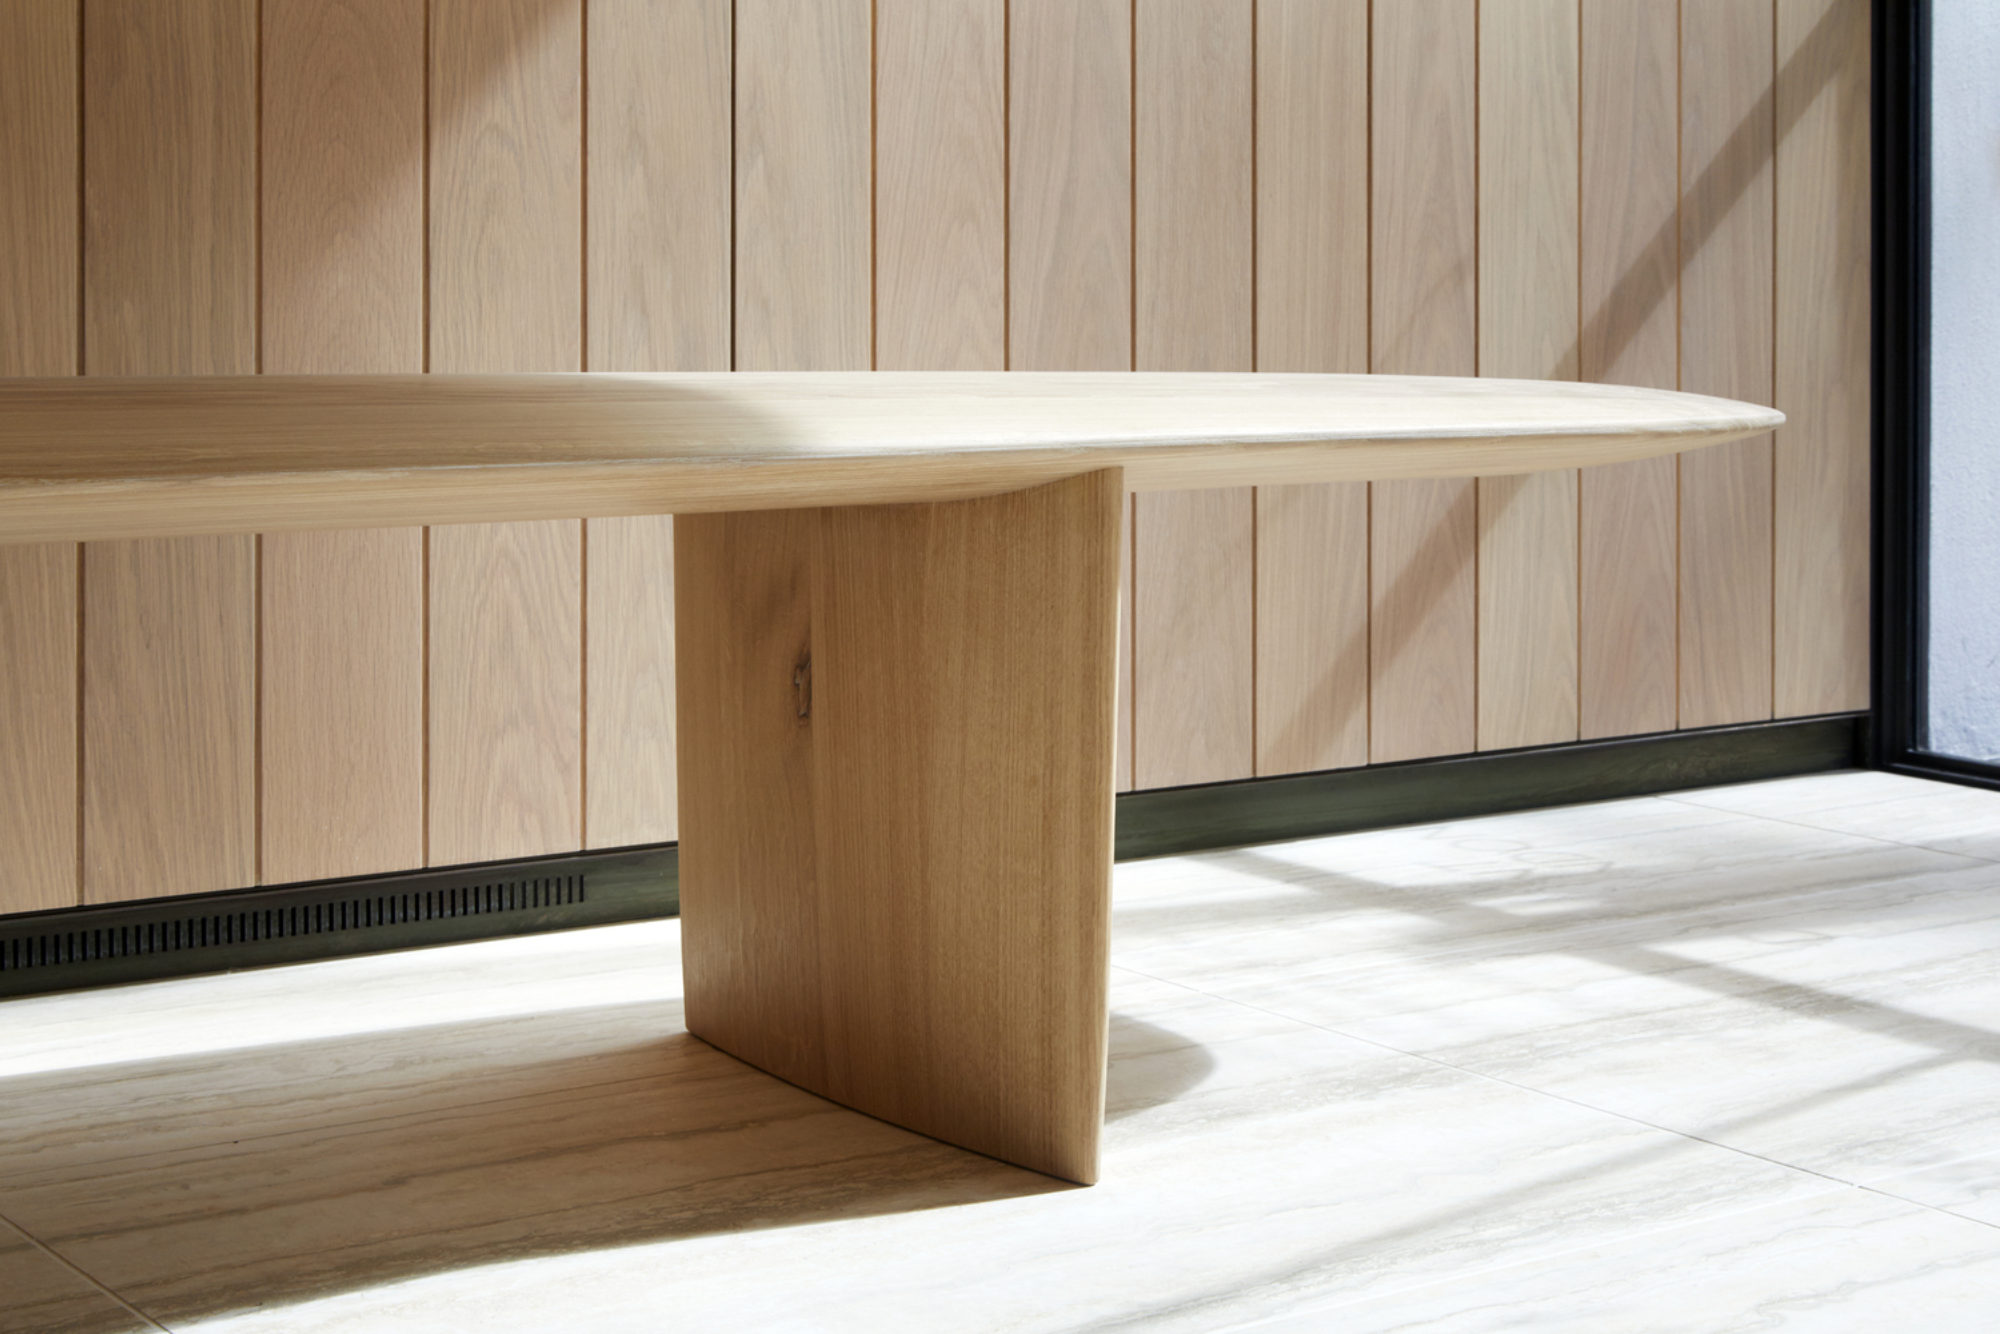 Ian McChesney bench at Savile Row wins Production category in Wood Awards 2019